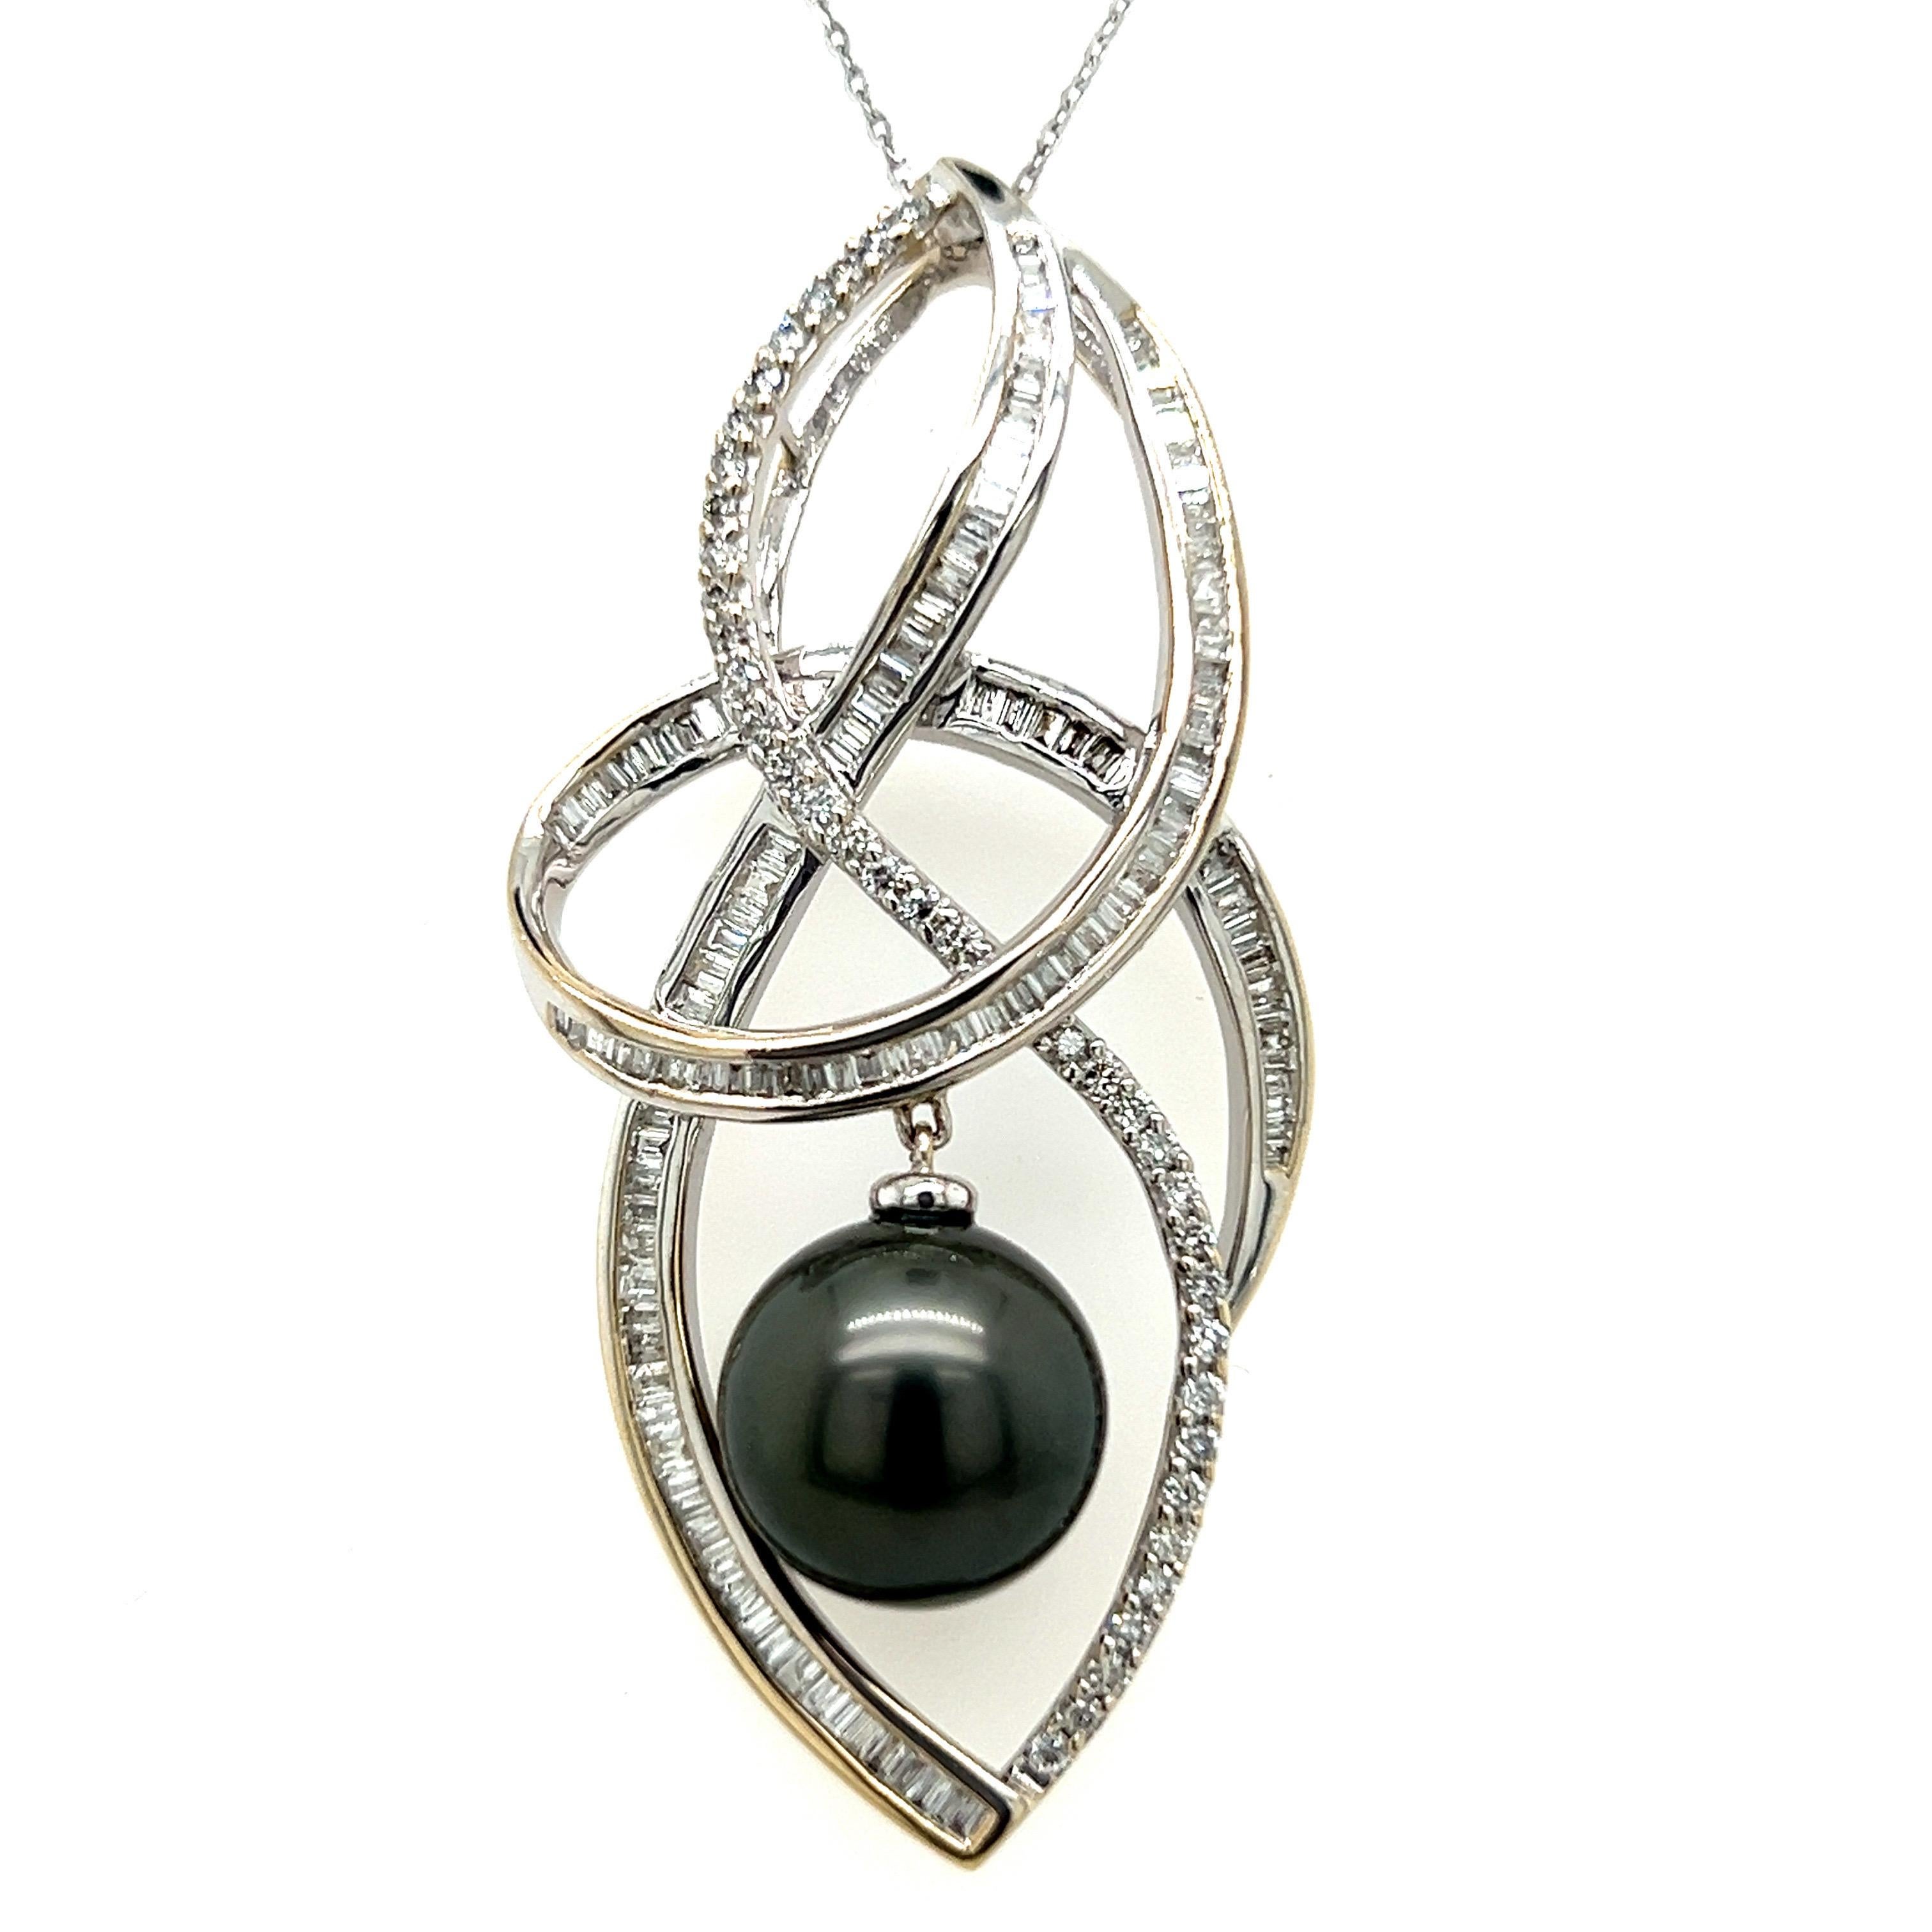 Elegant Tahitian pearl pendant. High pearly luster, slight Peacock overtone, natural 11mm Tahitian pearl dangling, accented with tapered baguette cut natural diamond and round brilliant cut diamonds. Handcrafted design set in 18 karats white gold,